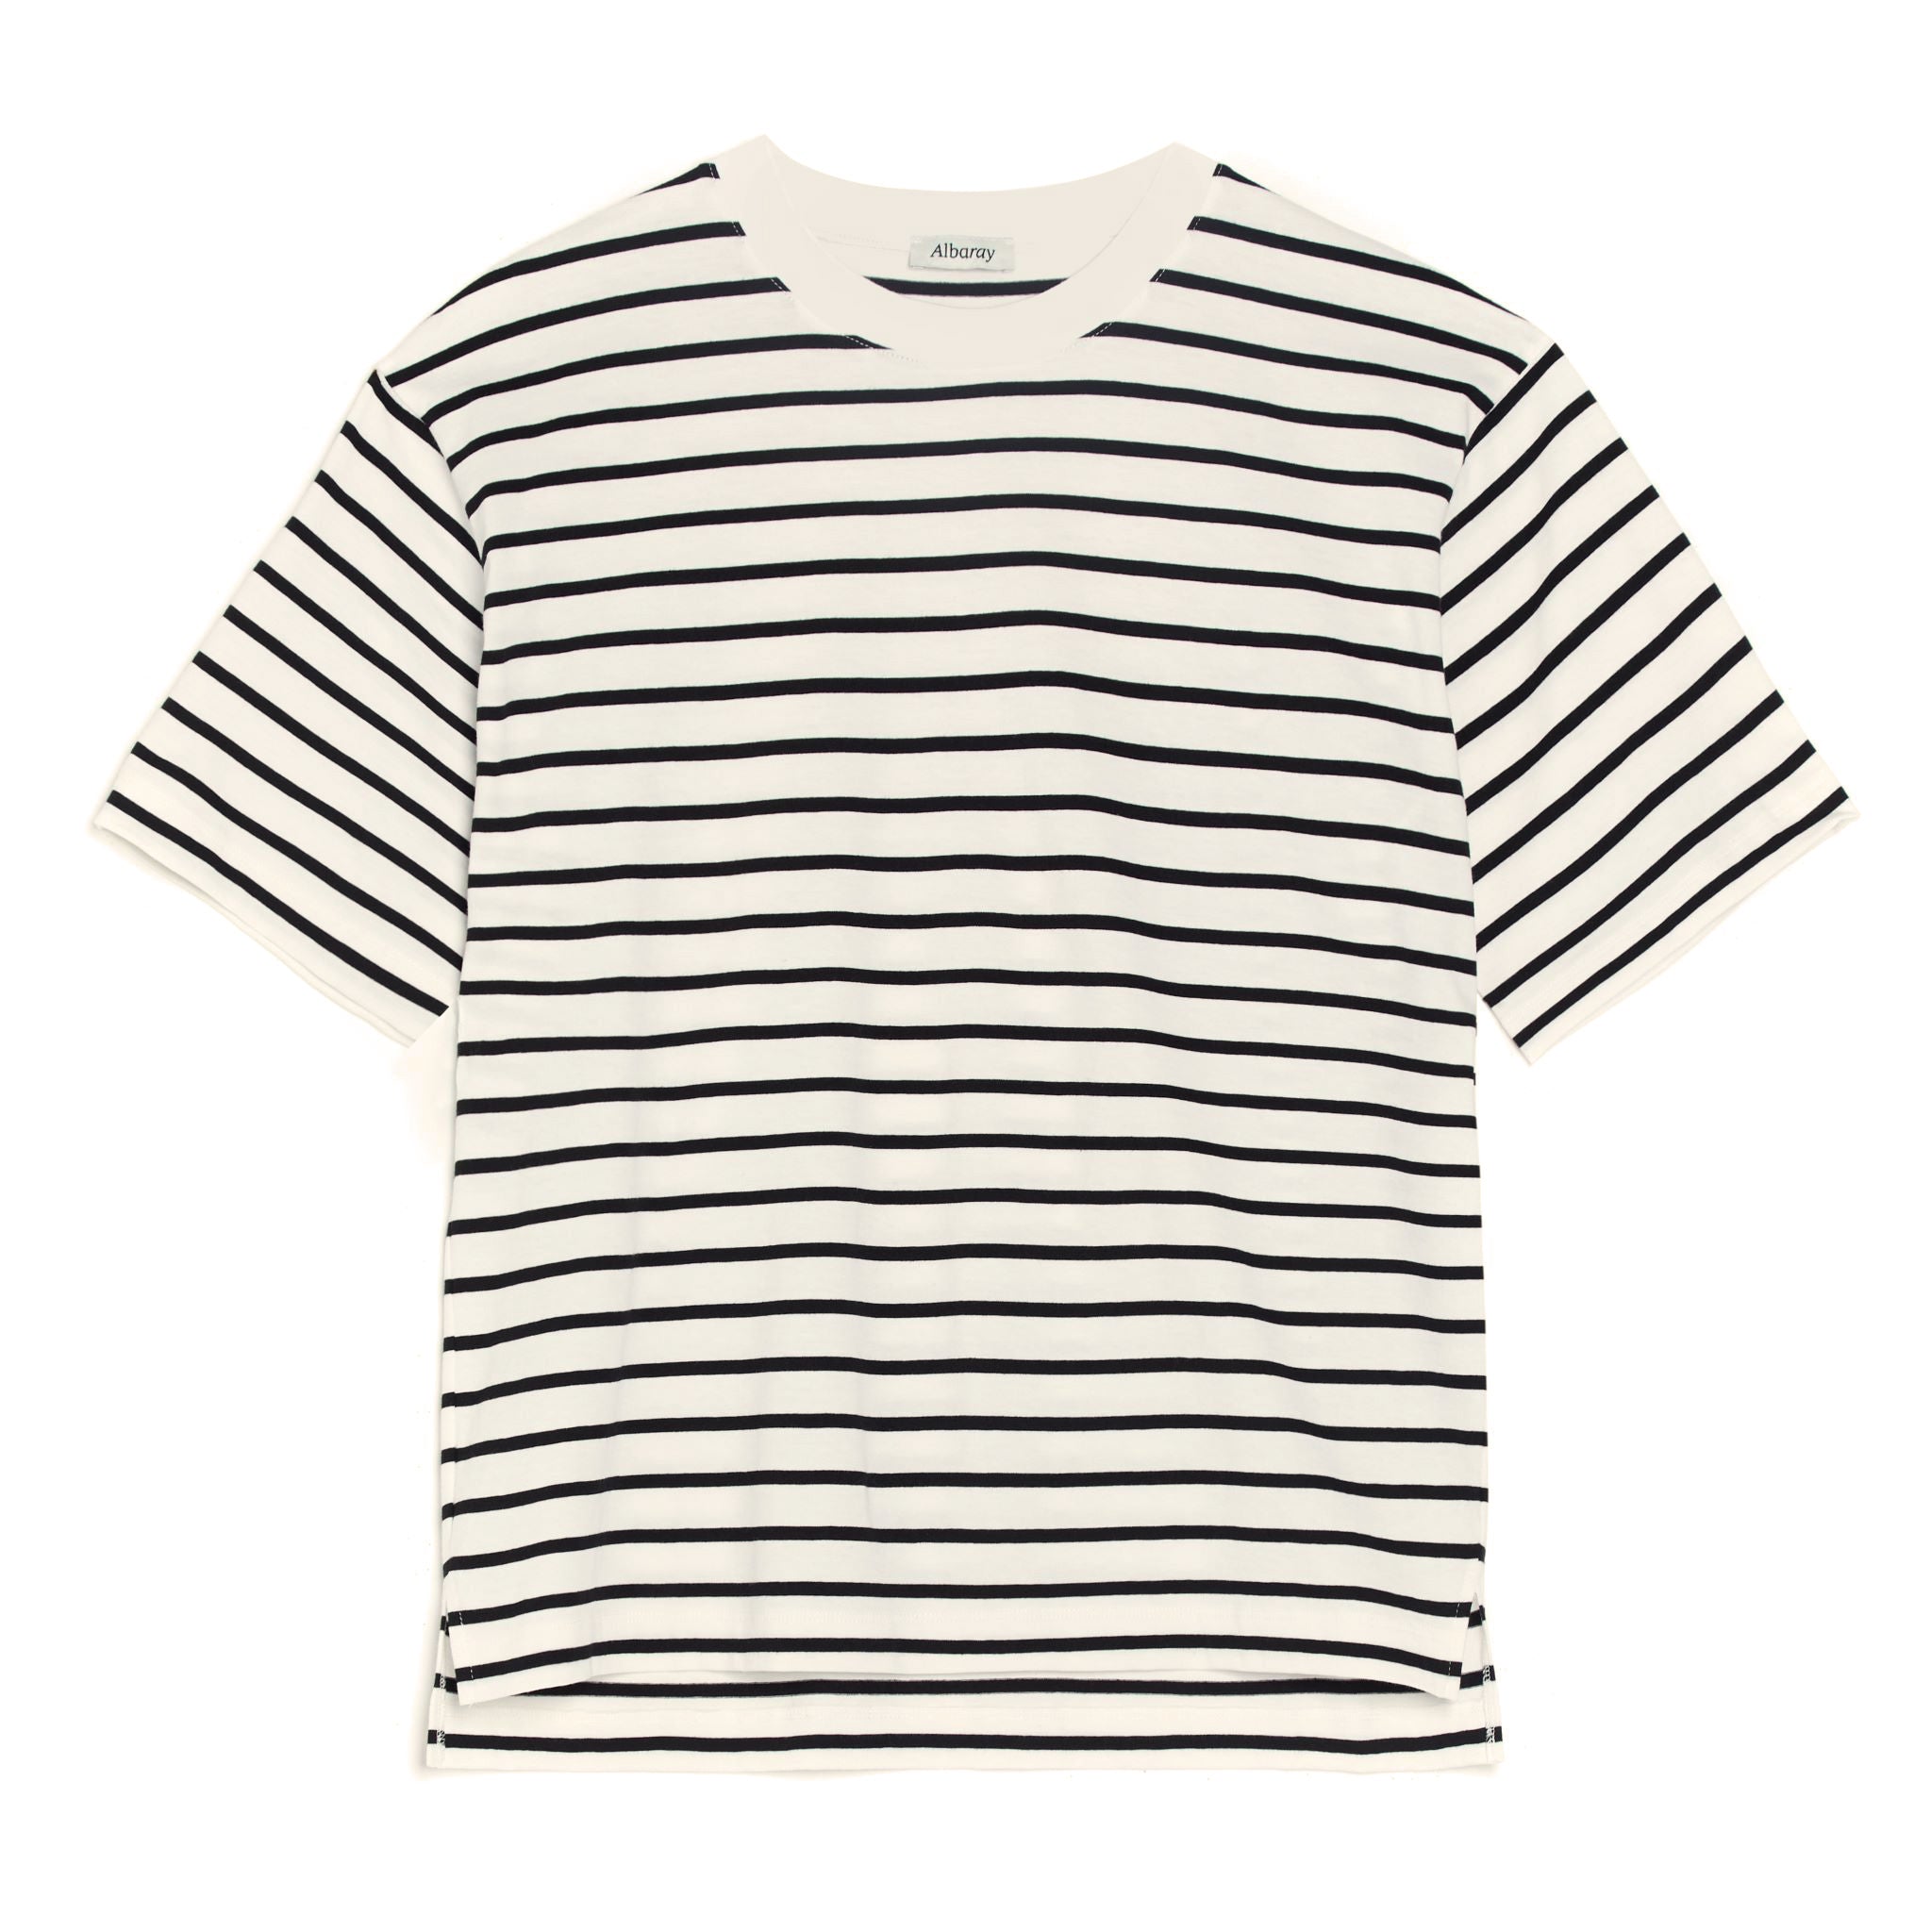 Black Relaxed Stripe Tee